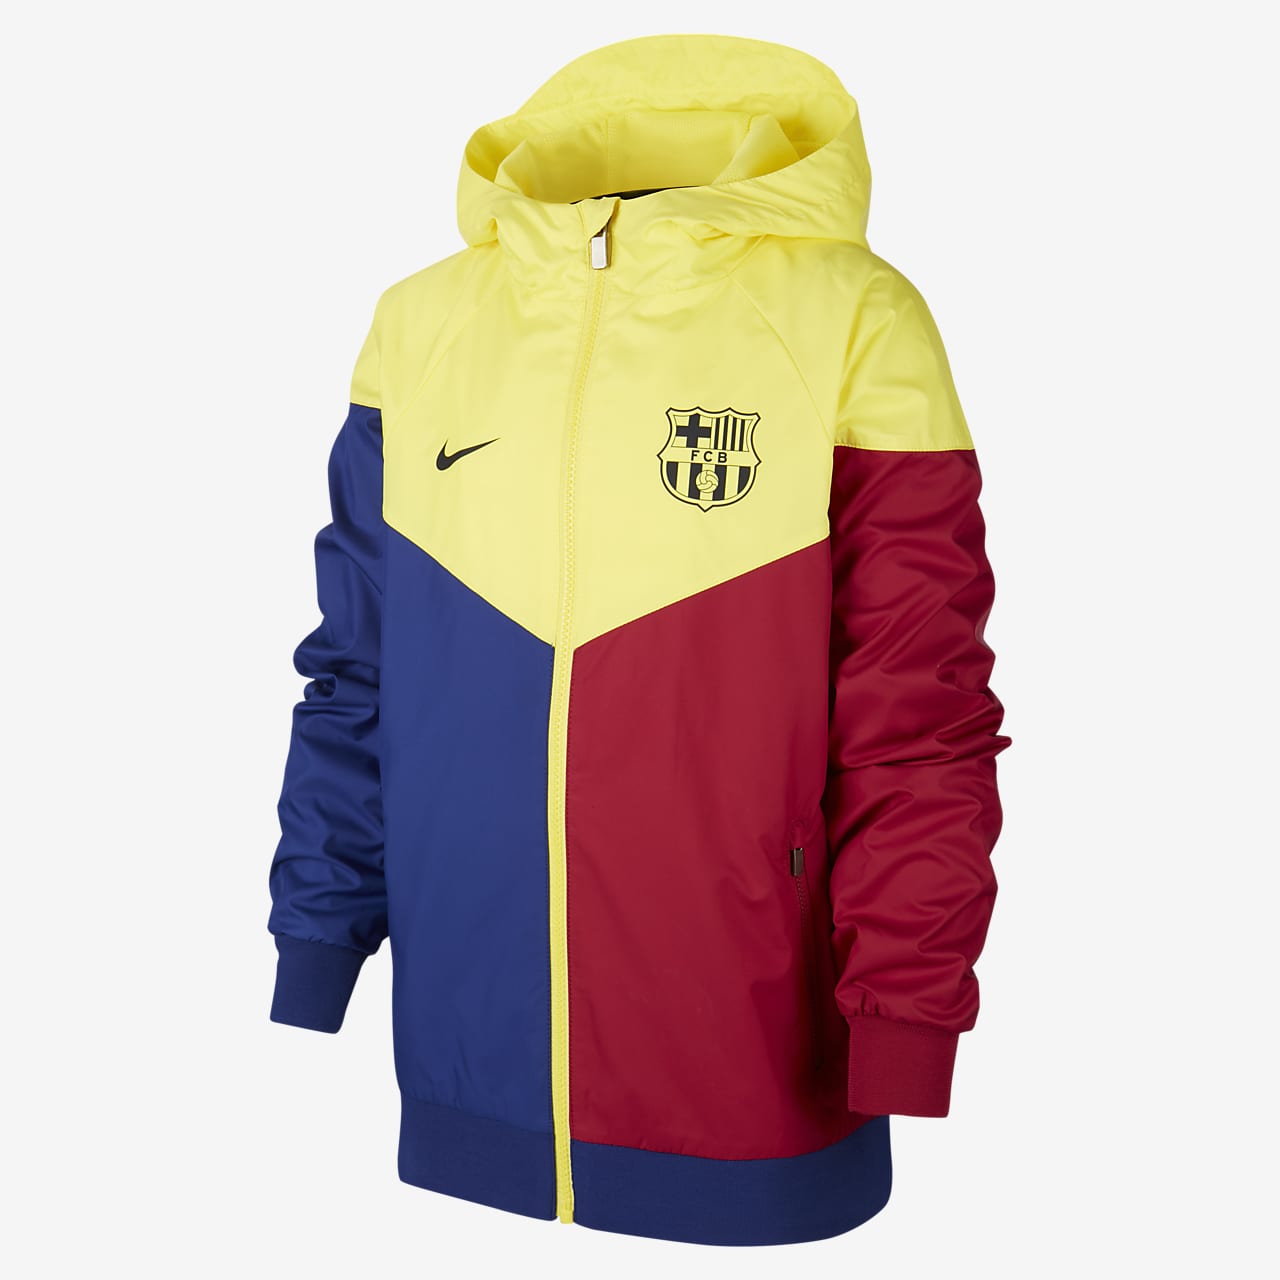 Barcelona Fc Jacket Nike : Pin On Licensed Soccer Jackets - The fc ...